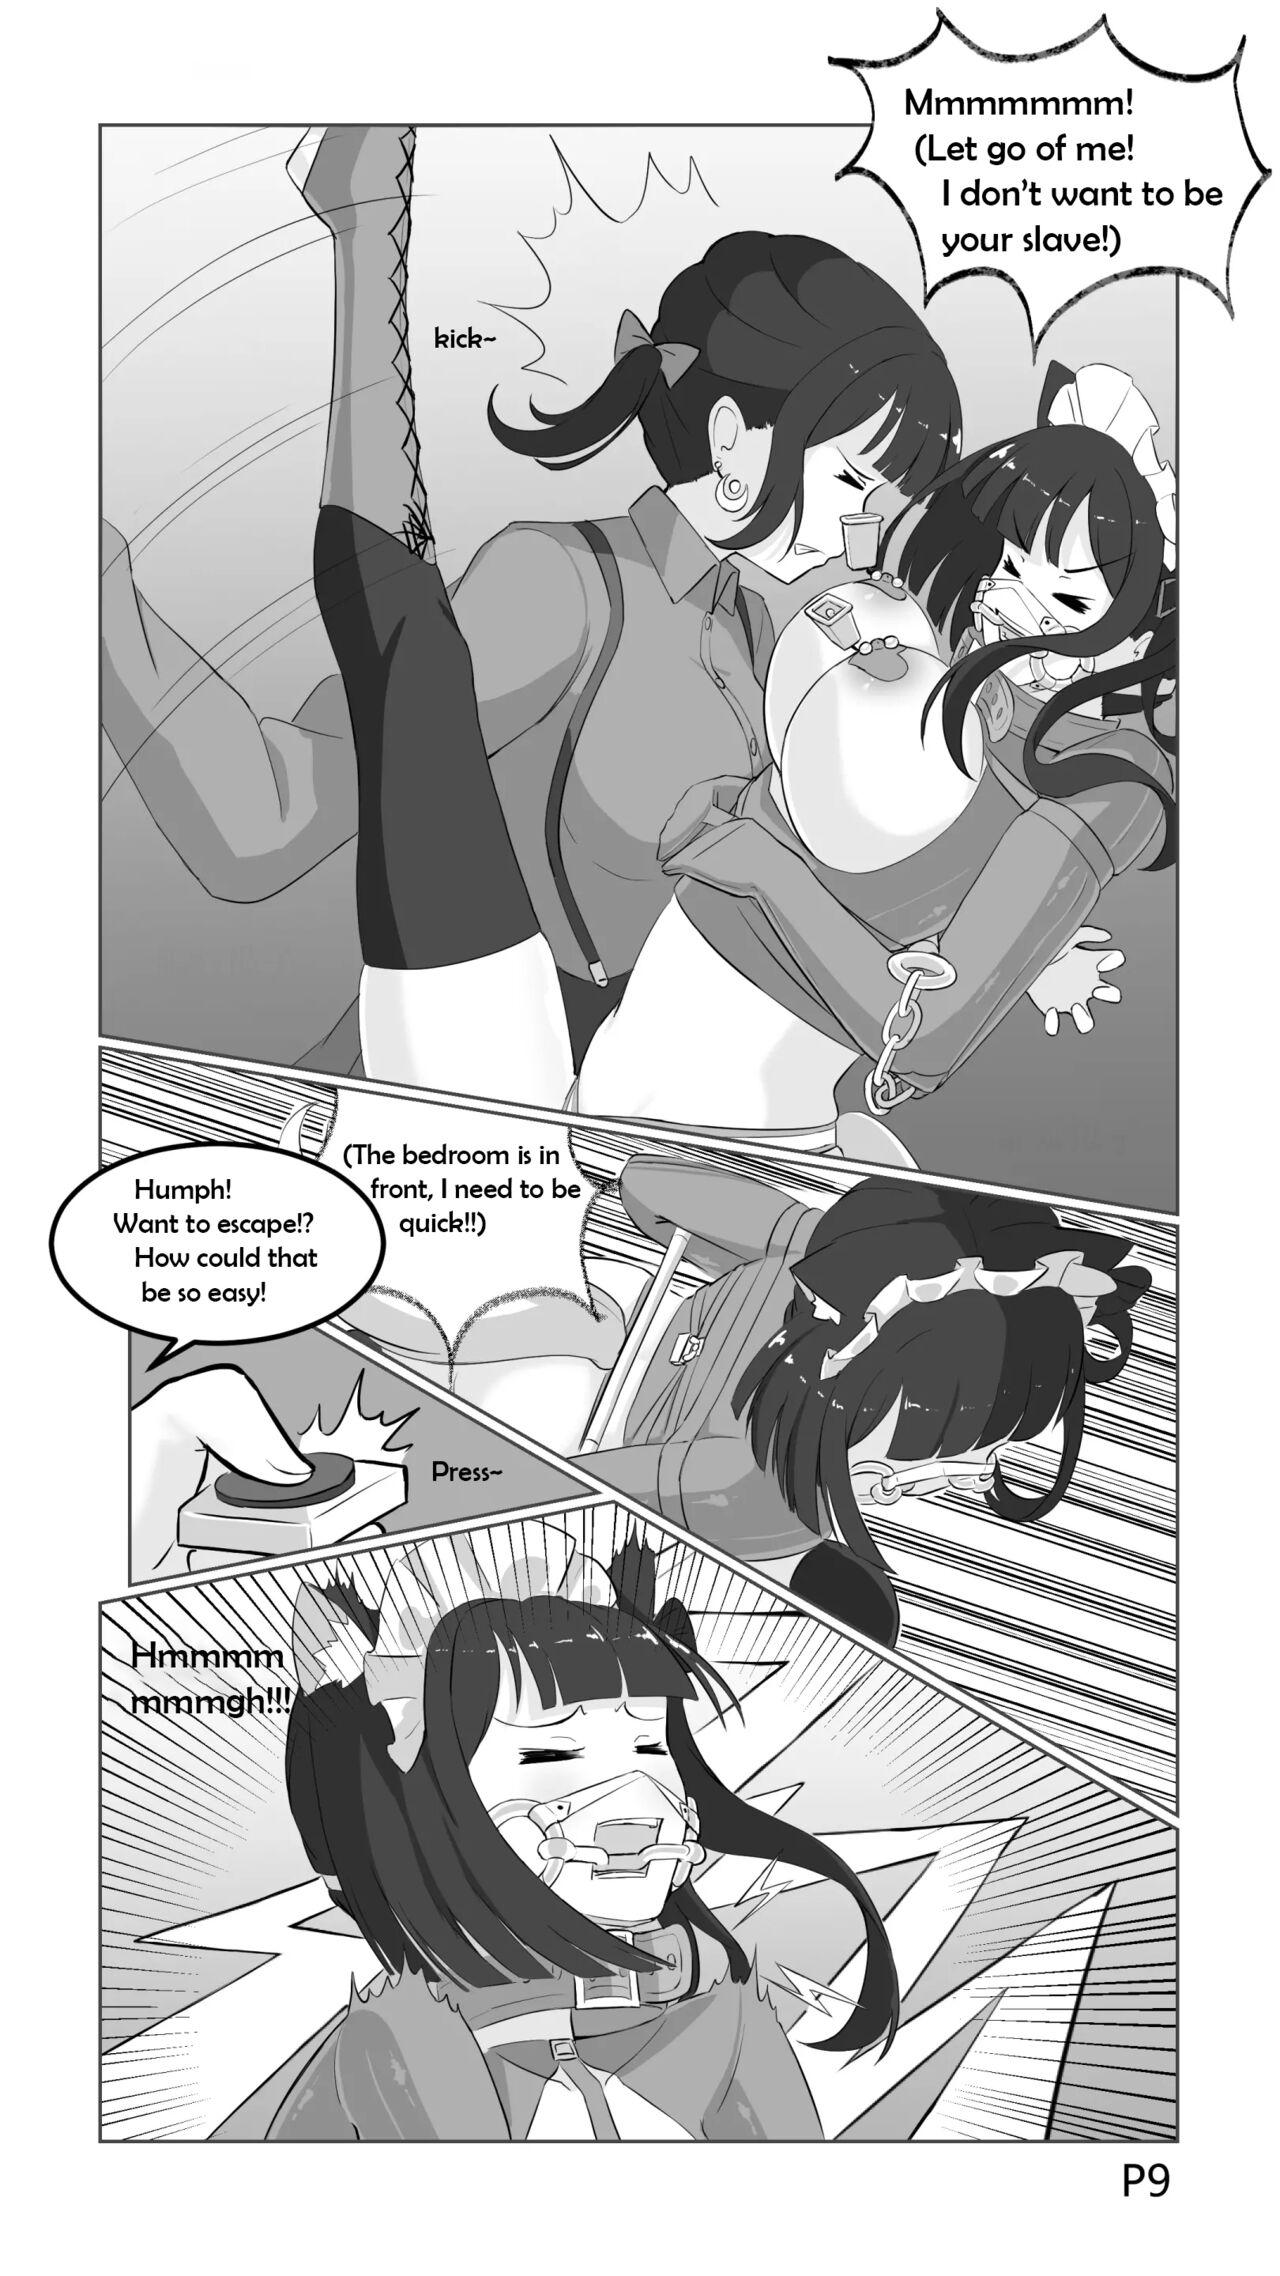 Russian Trap for catching ponies - Original Wet - Page 9